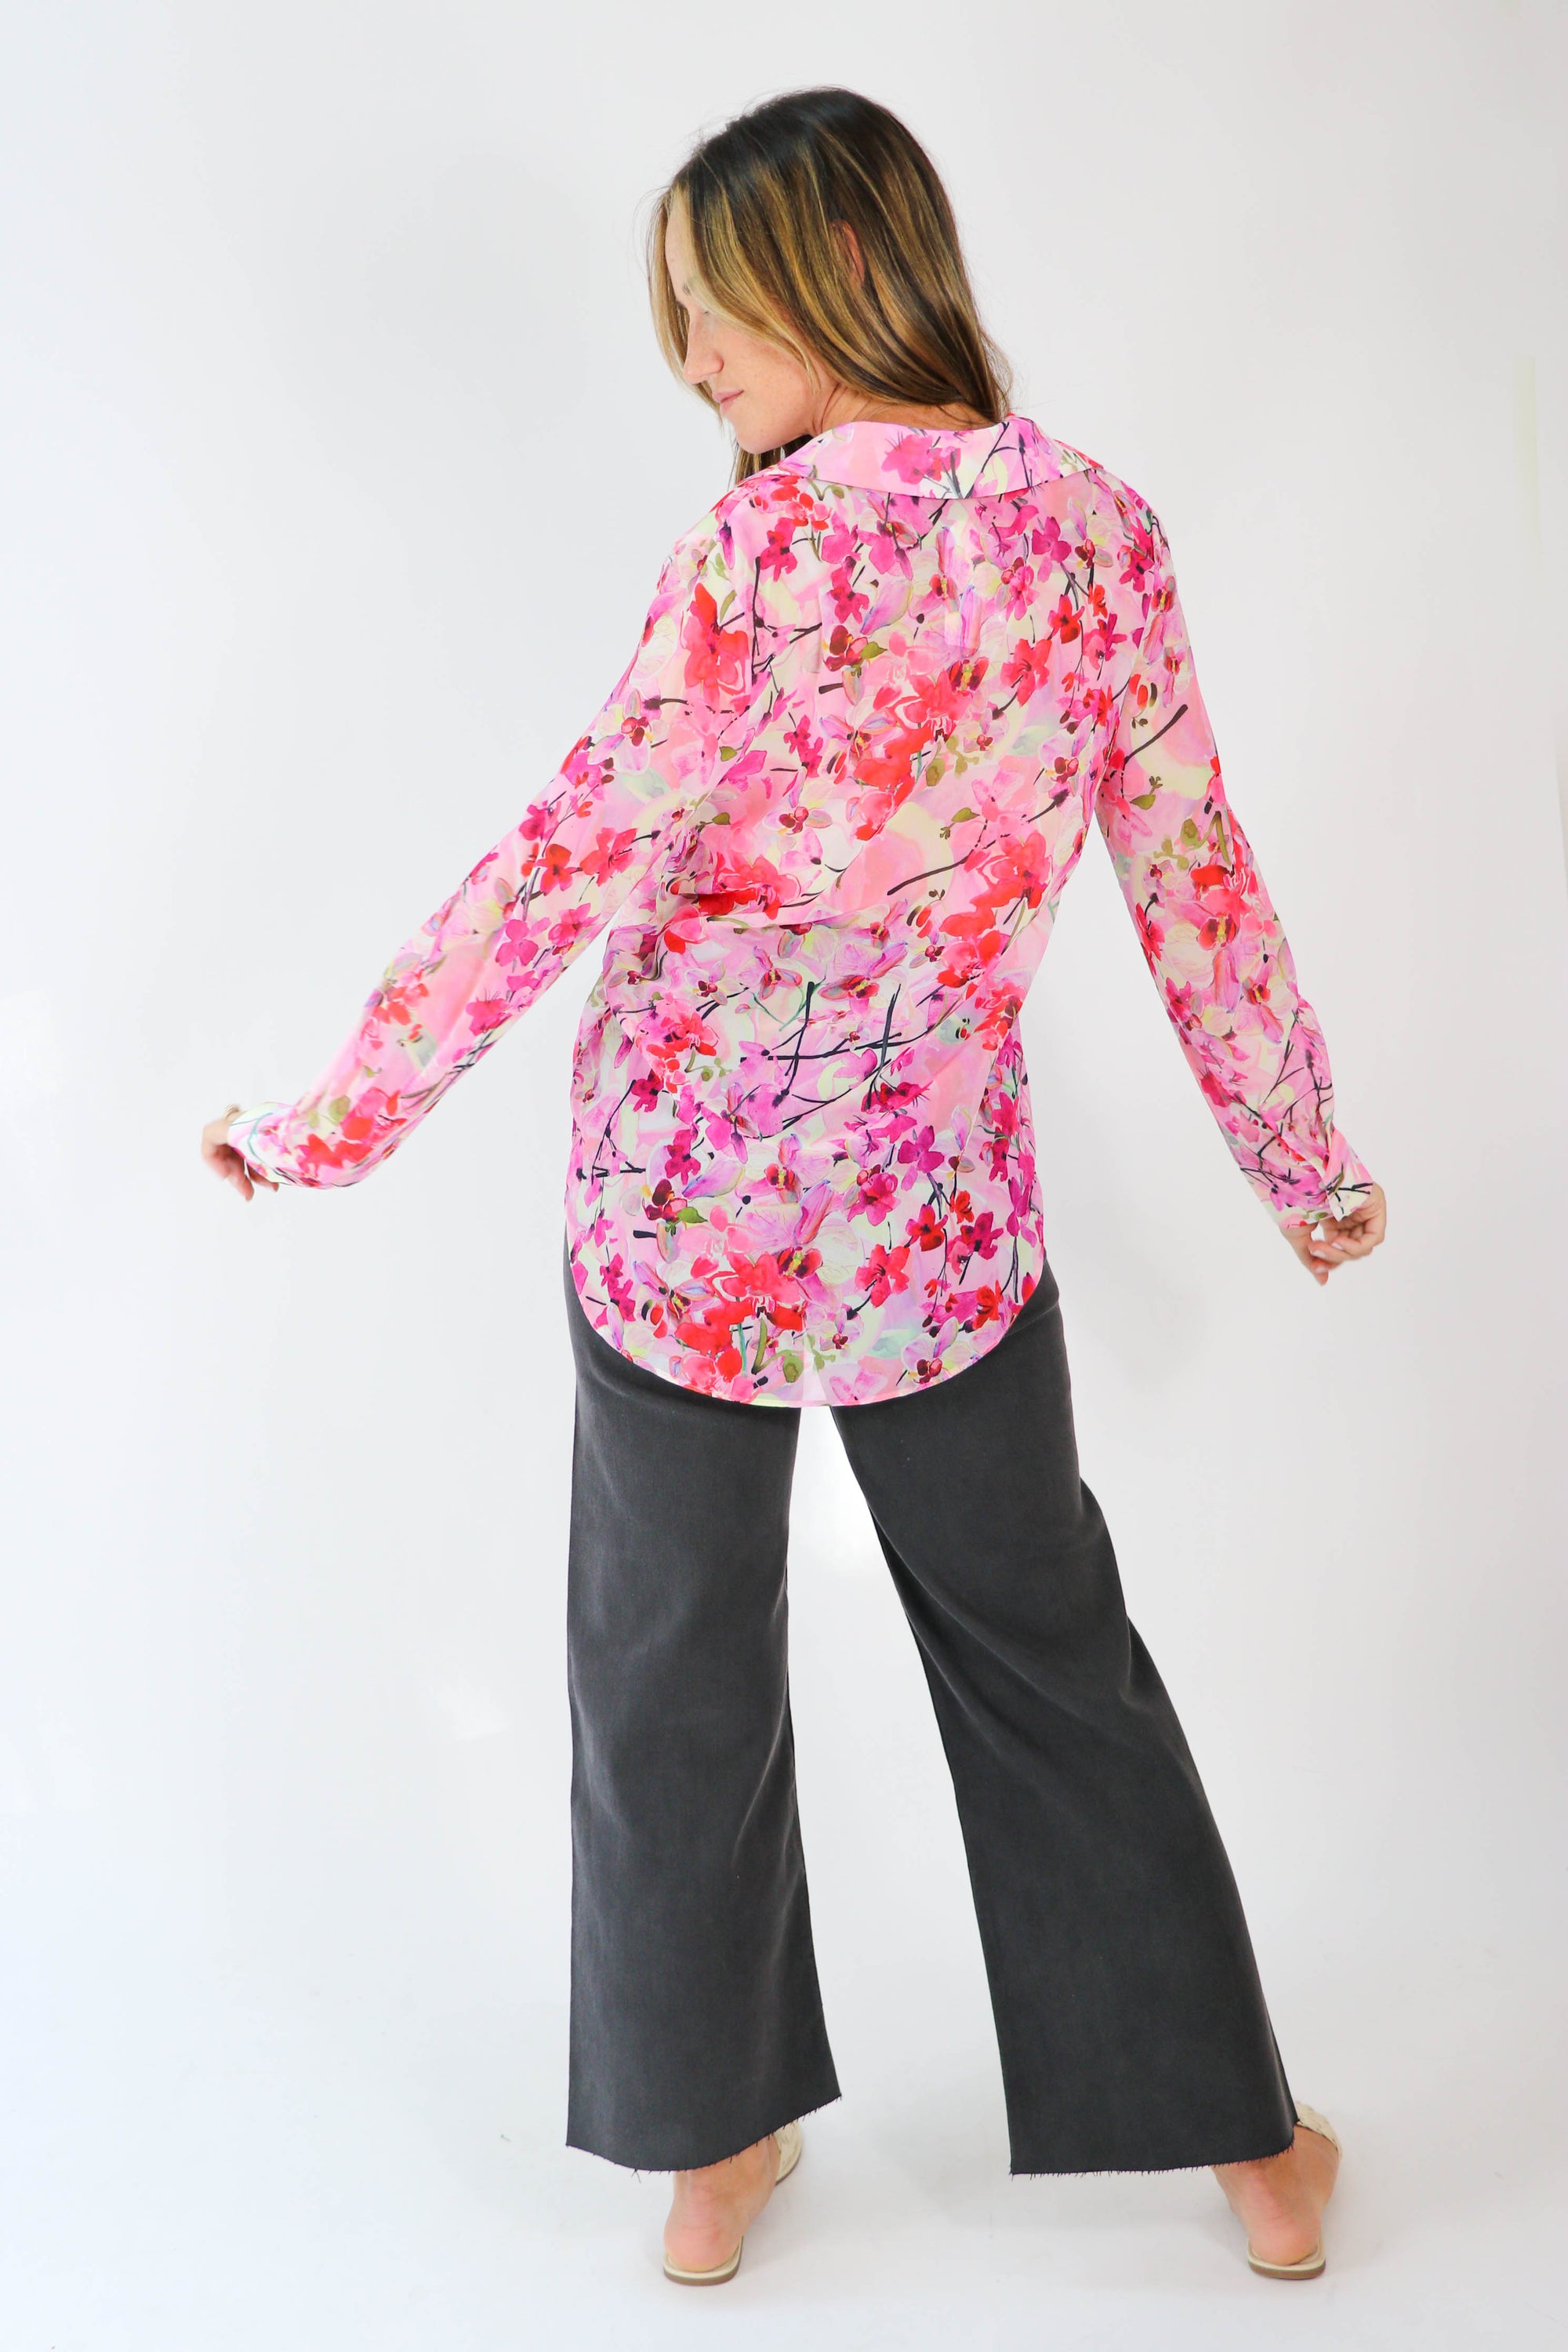 Sheer Bright Floral Button Down Top for Women | Sweetest Stitch